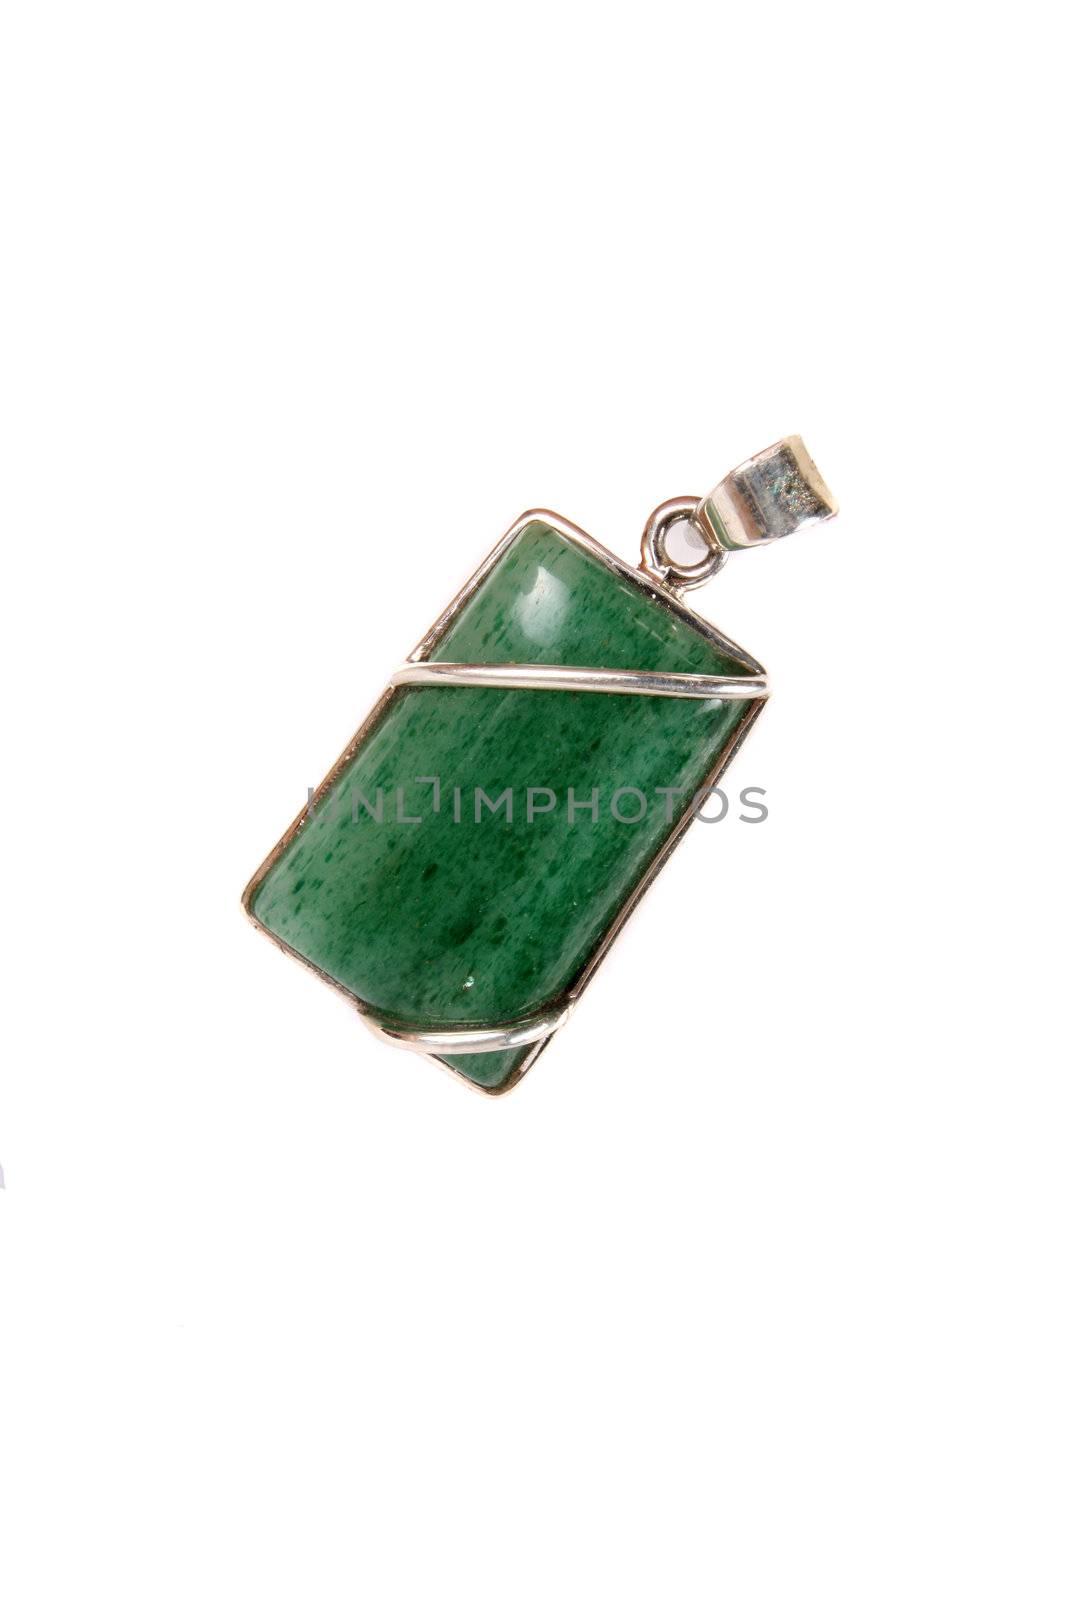 Green Jade Pendant by thefinalmiracle